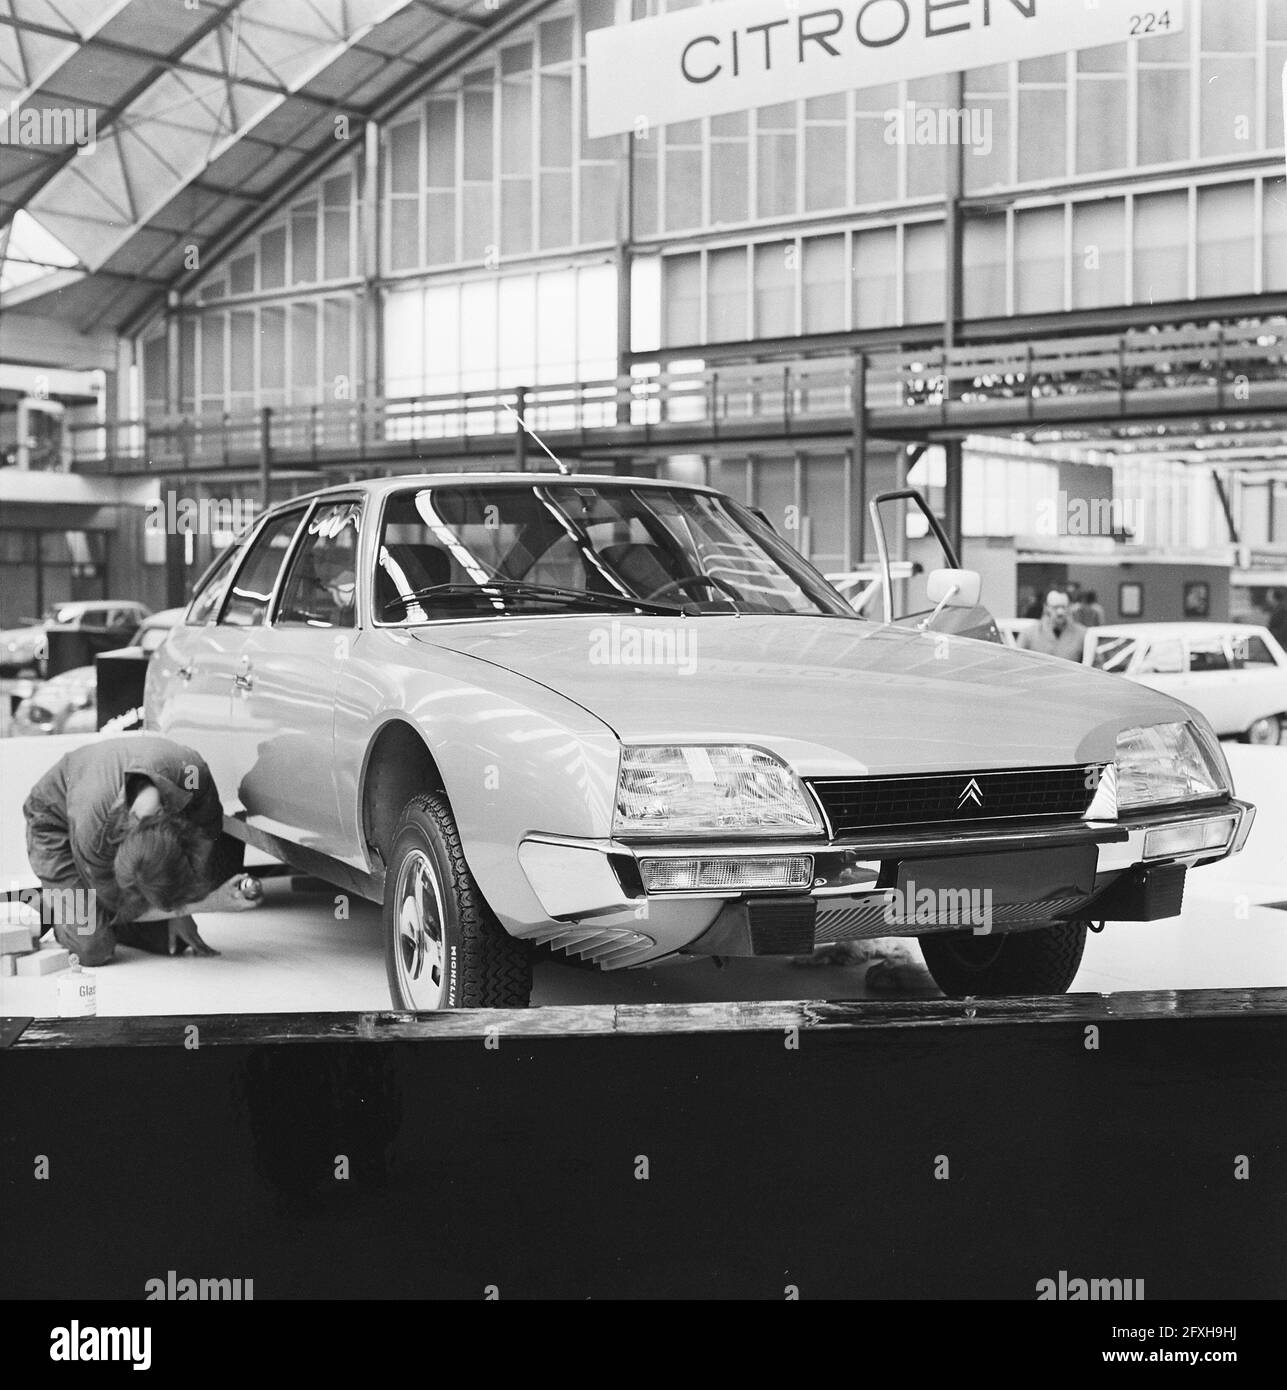 Preparations RAI passenger car75 in Amsterdam, overview with in the foreground the car of the year the Citroen CX, February 11, 1975, Autos, exhibitions, The Netherlands, 20th century press agency photo, news to remember, documentary, historic photography 1945-1990, visual stories, human history of the Twentieth Century, capturing moments in time Stock Photo